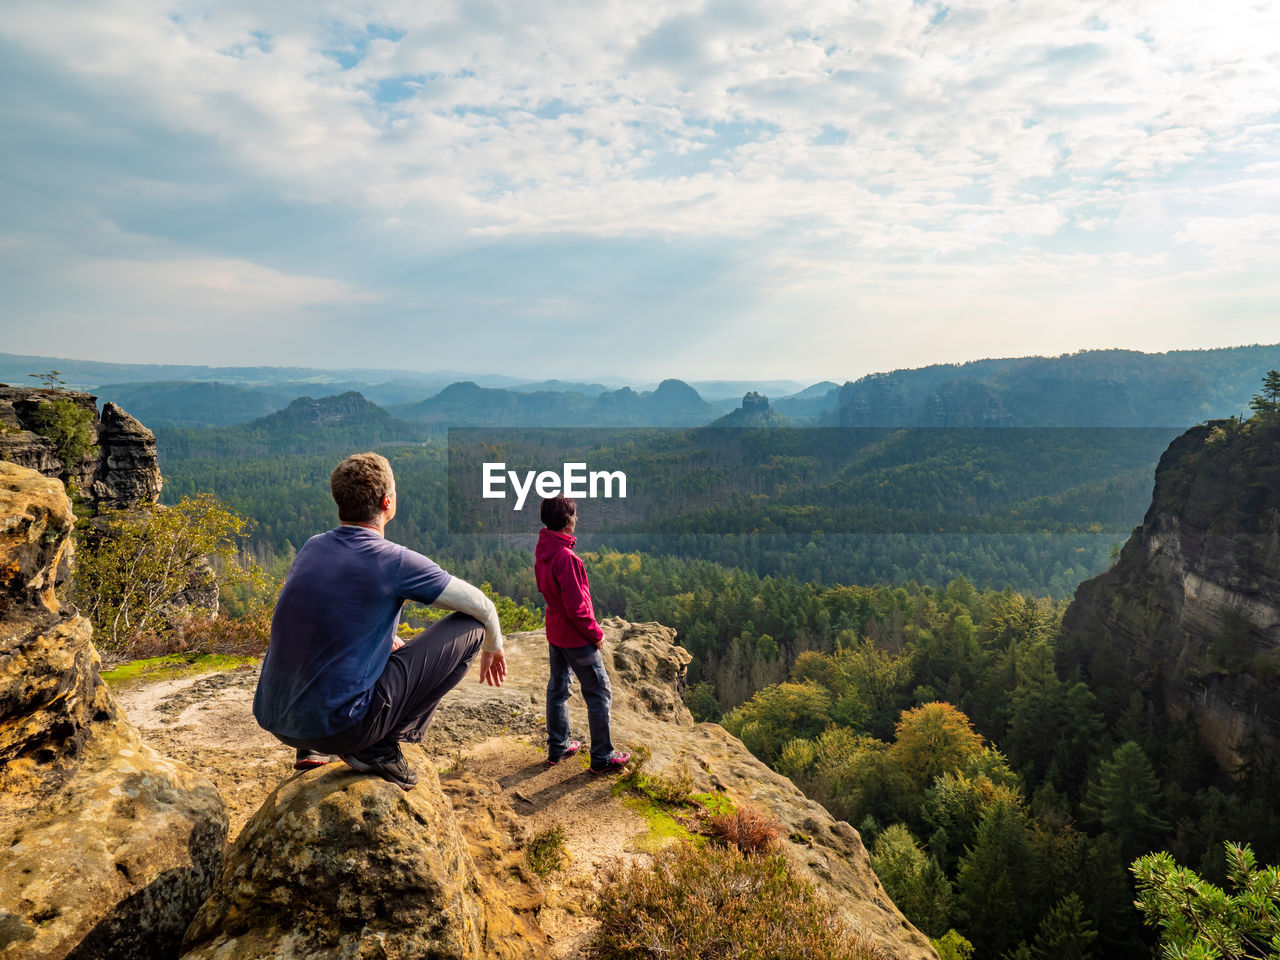 Man hiker sit on edge and woman tourist bellow watching over sunny landscape saxon switzerland.